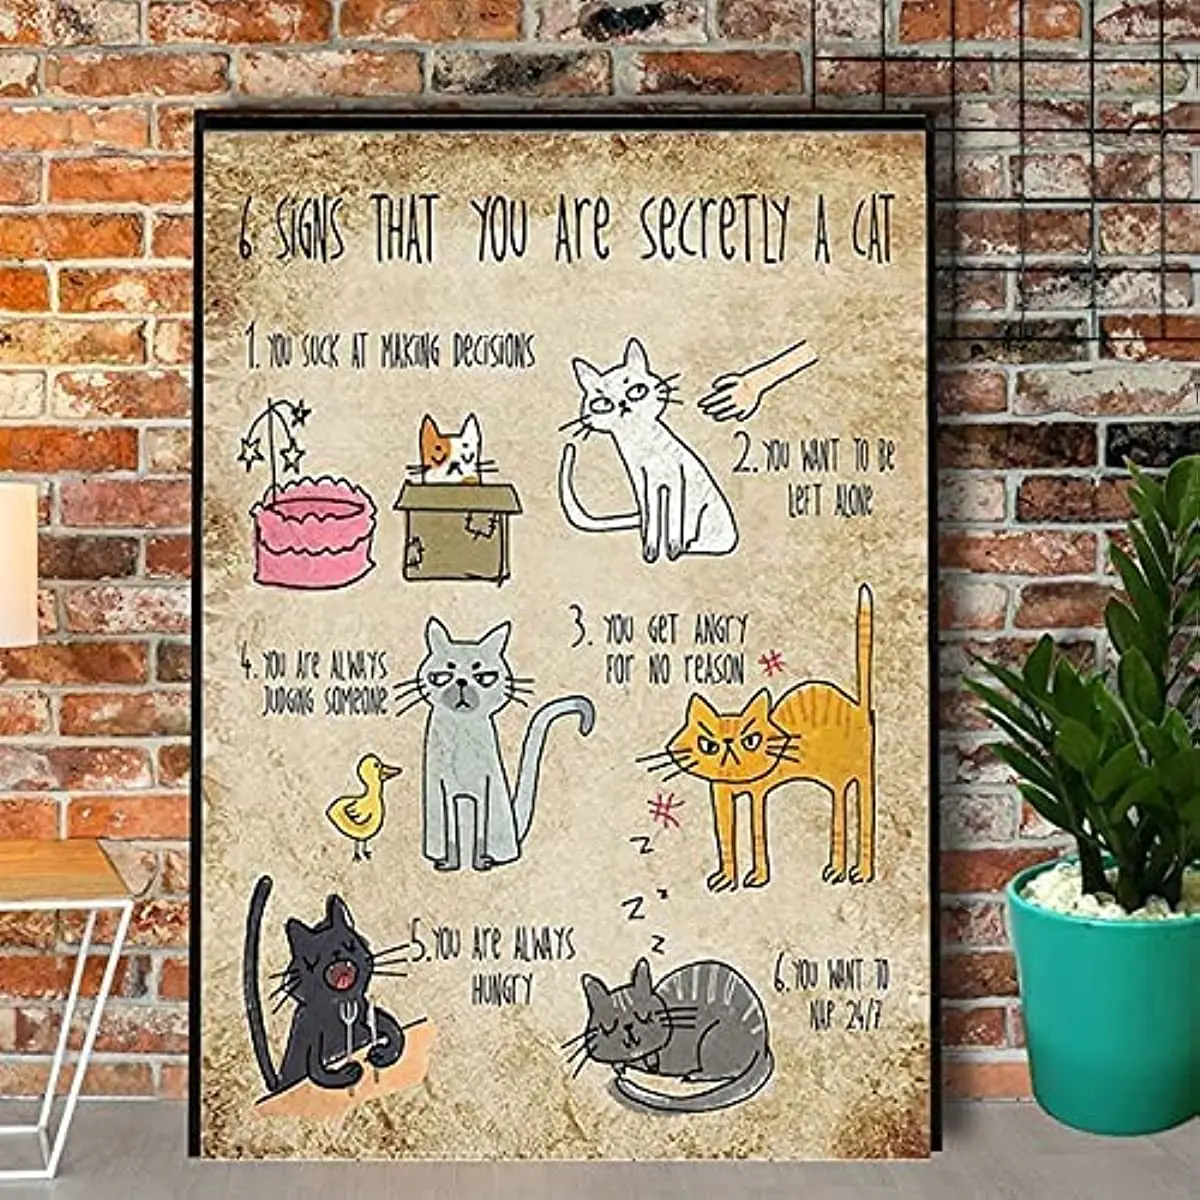 

Funny Metal Sign Cat Six Signs That You are Secretly A Cat Bathroom Bedroom Cafe Wall Decoration Man Cave Best